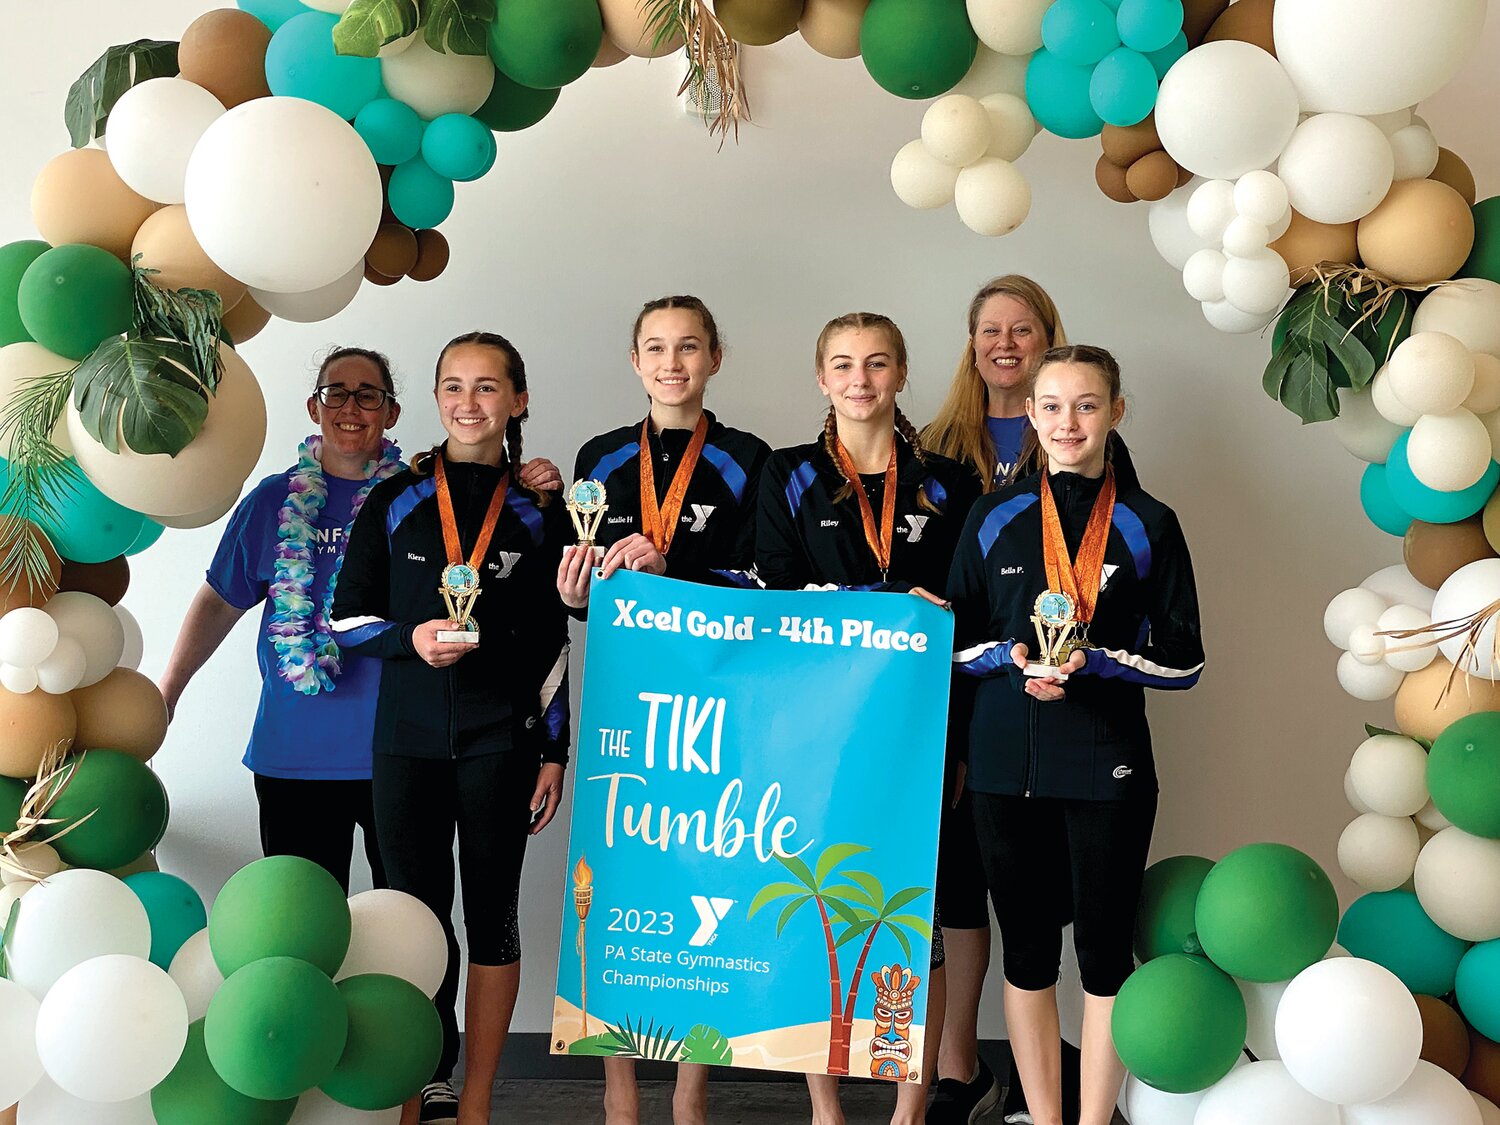 The Xcel Gold fourth-place team: From left: Kiera McComsey, Natalie Higgins, Riley Moyer and Bella Price; back row, coaches Jade Wilhelm and Janine Brown. Missing from photo: Rachel Snedigar, Alexa Zwart and Dahlia Brose.